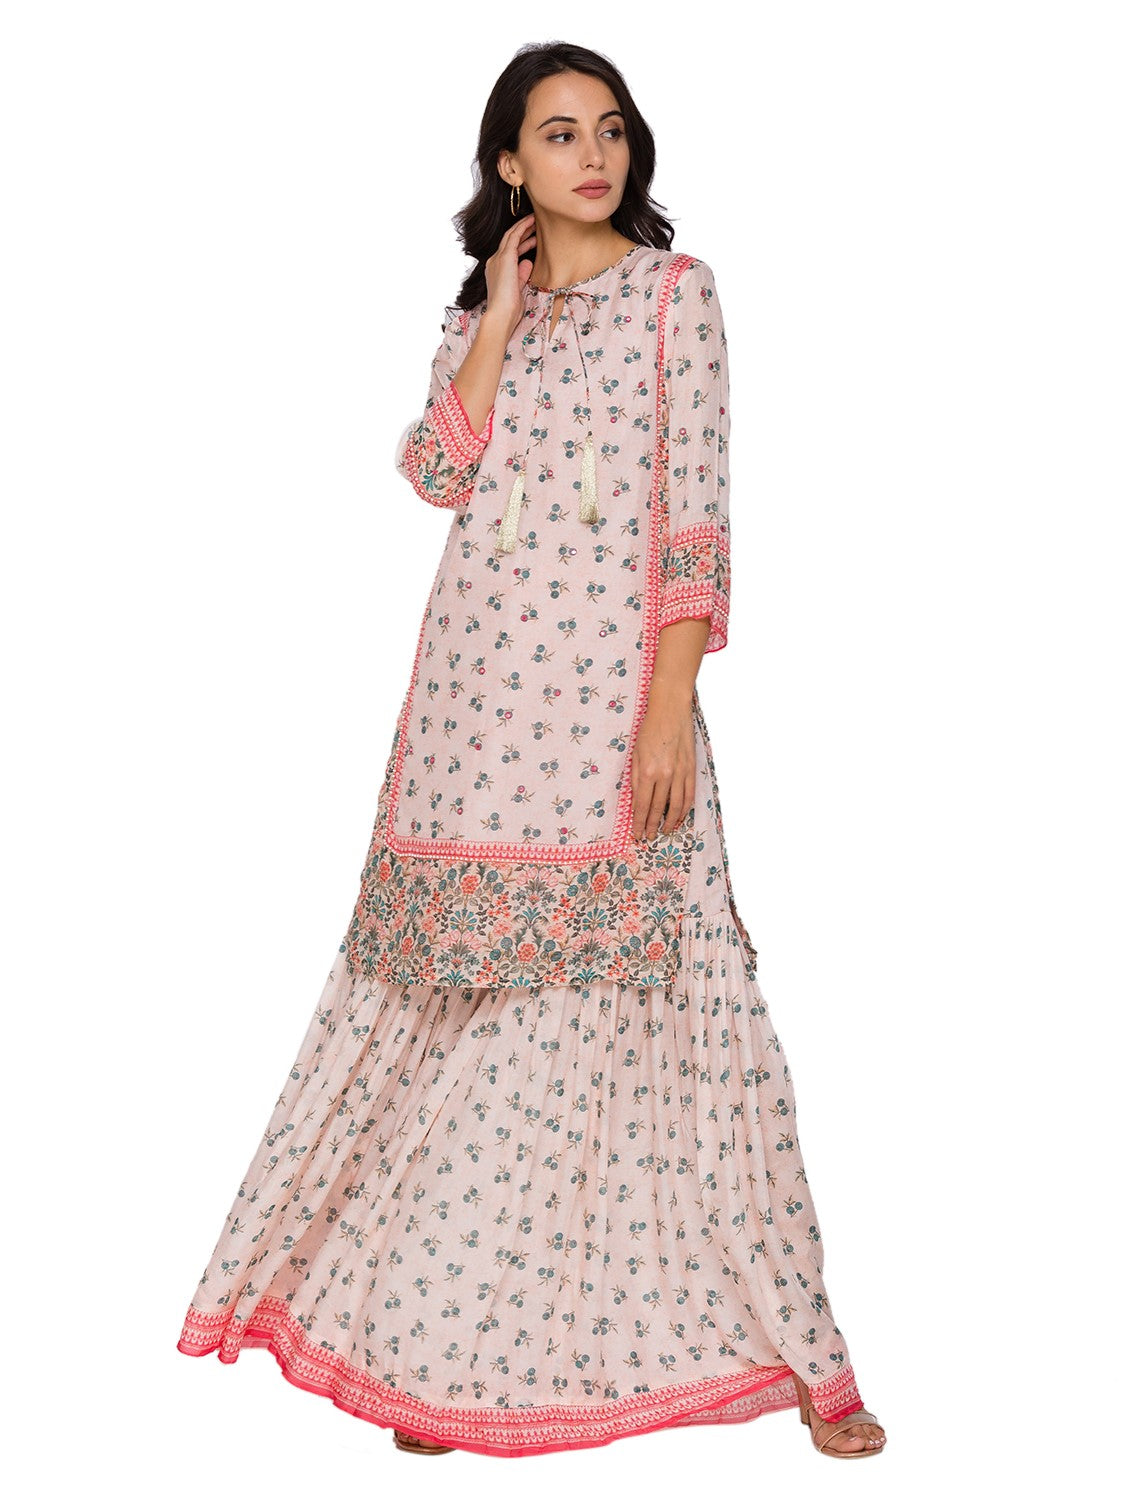 Eden Printed Kurta With Neck Tie Up Paired With Sharara Pants Embellished With Pearls